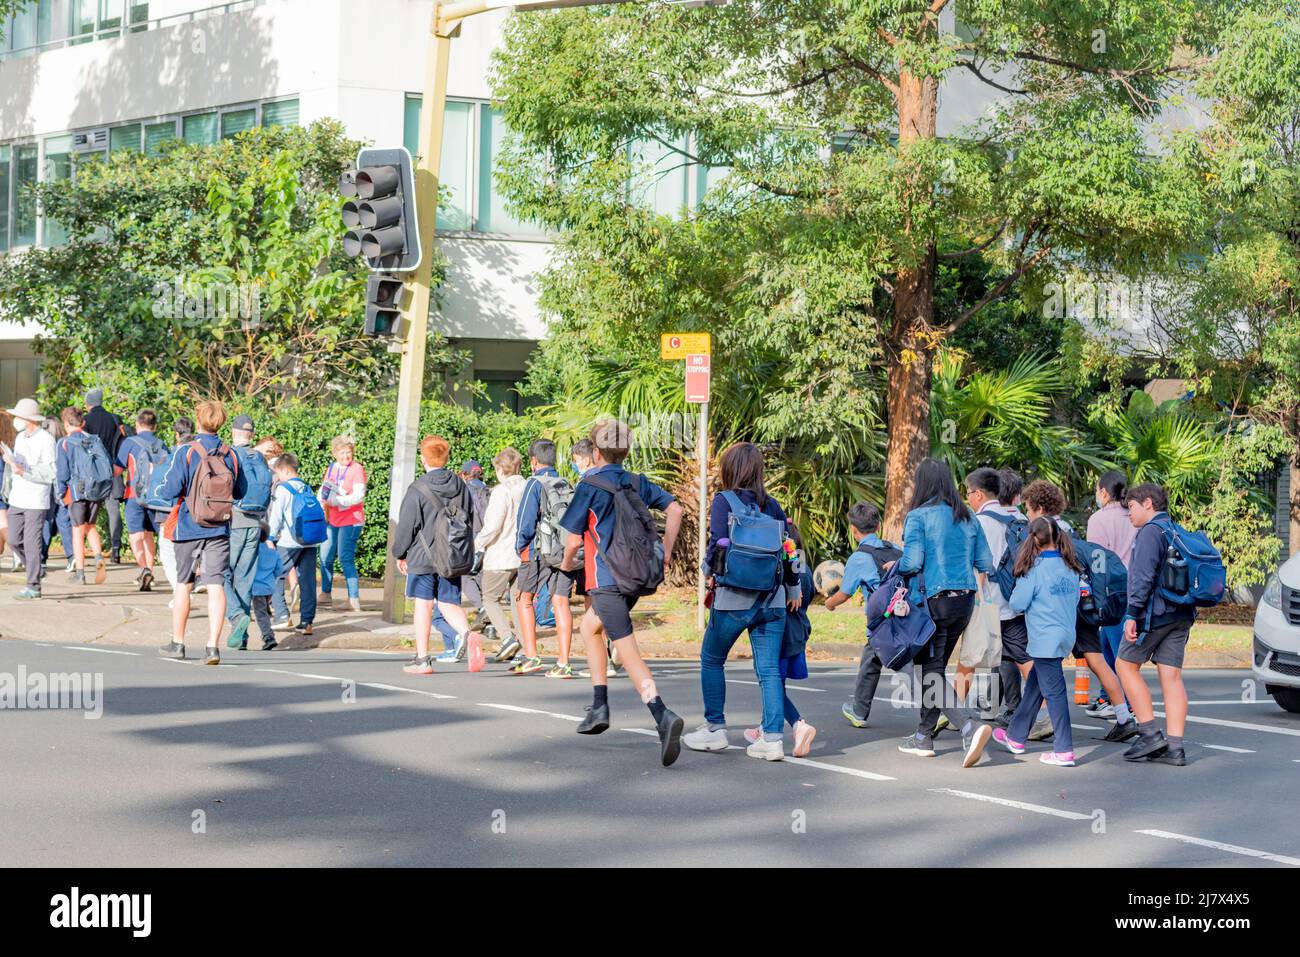 Australian school children in the state of New South Wales, carrying backpacks, some accompanied by adults, crossing at a busy pedestrian crossing Stock Photo